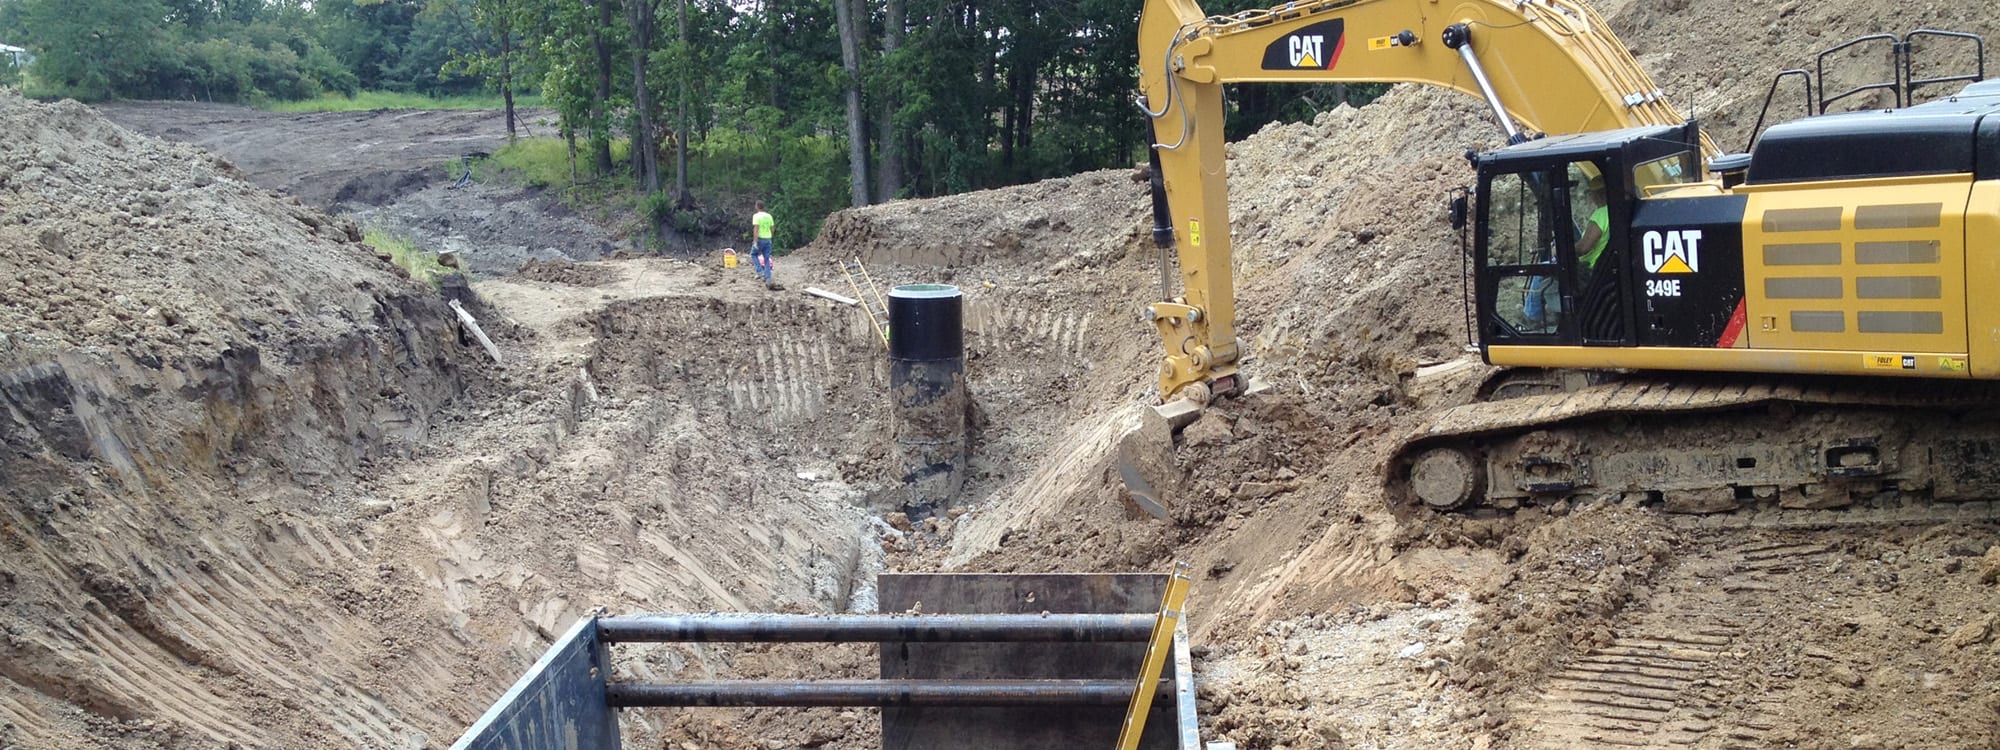 Hunt Midwest Development Services - Infrastructure Services - Twin Creeks Area Sewer Improvement